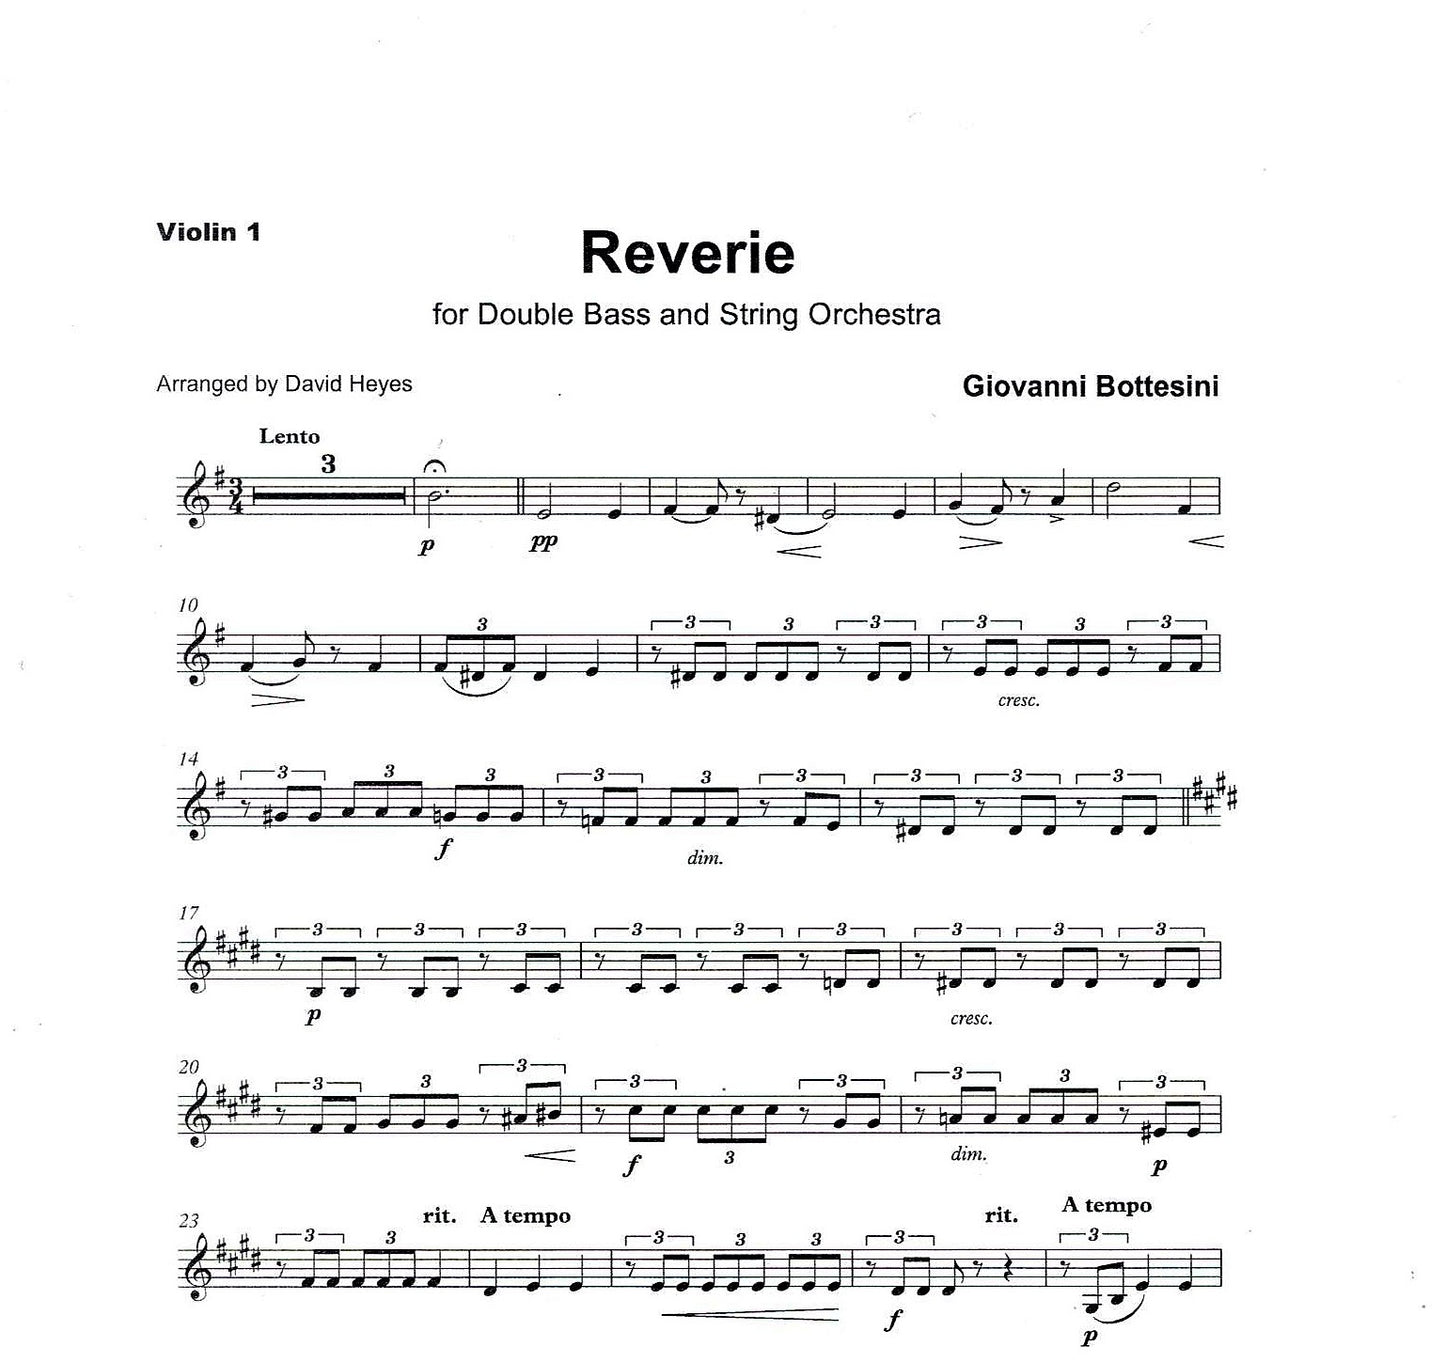 Bottesini: Reverie for double bass & string orchestra (Solo Tuning)